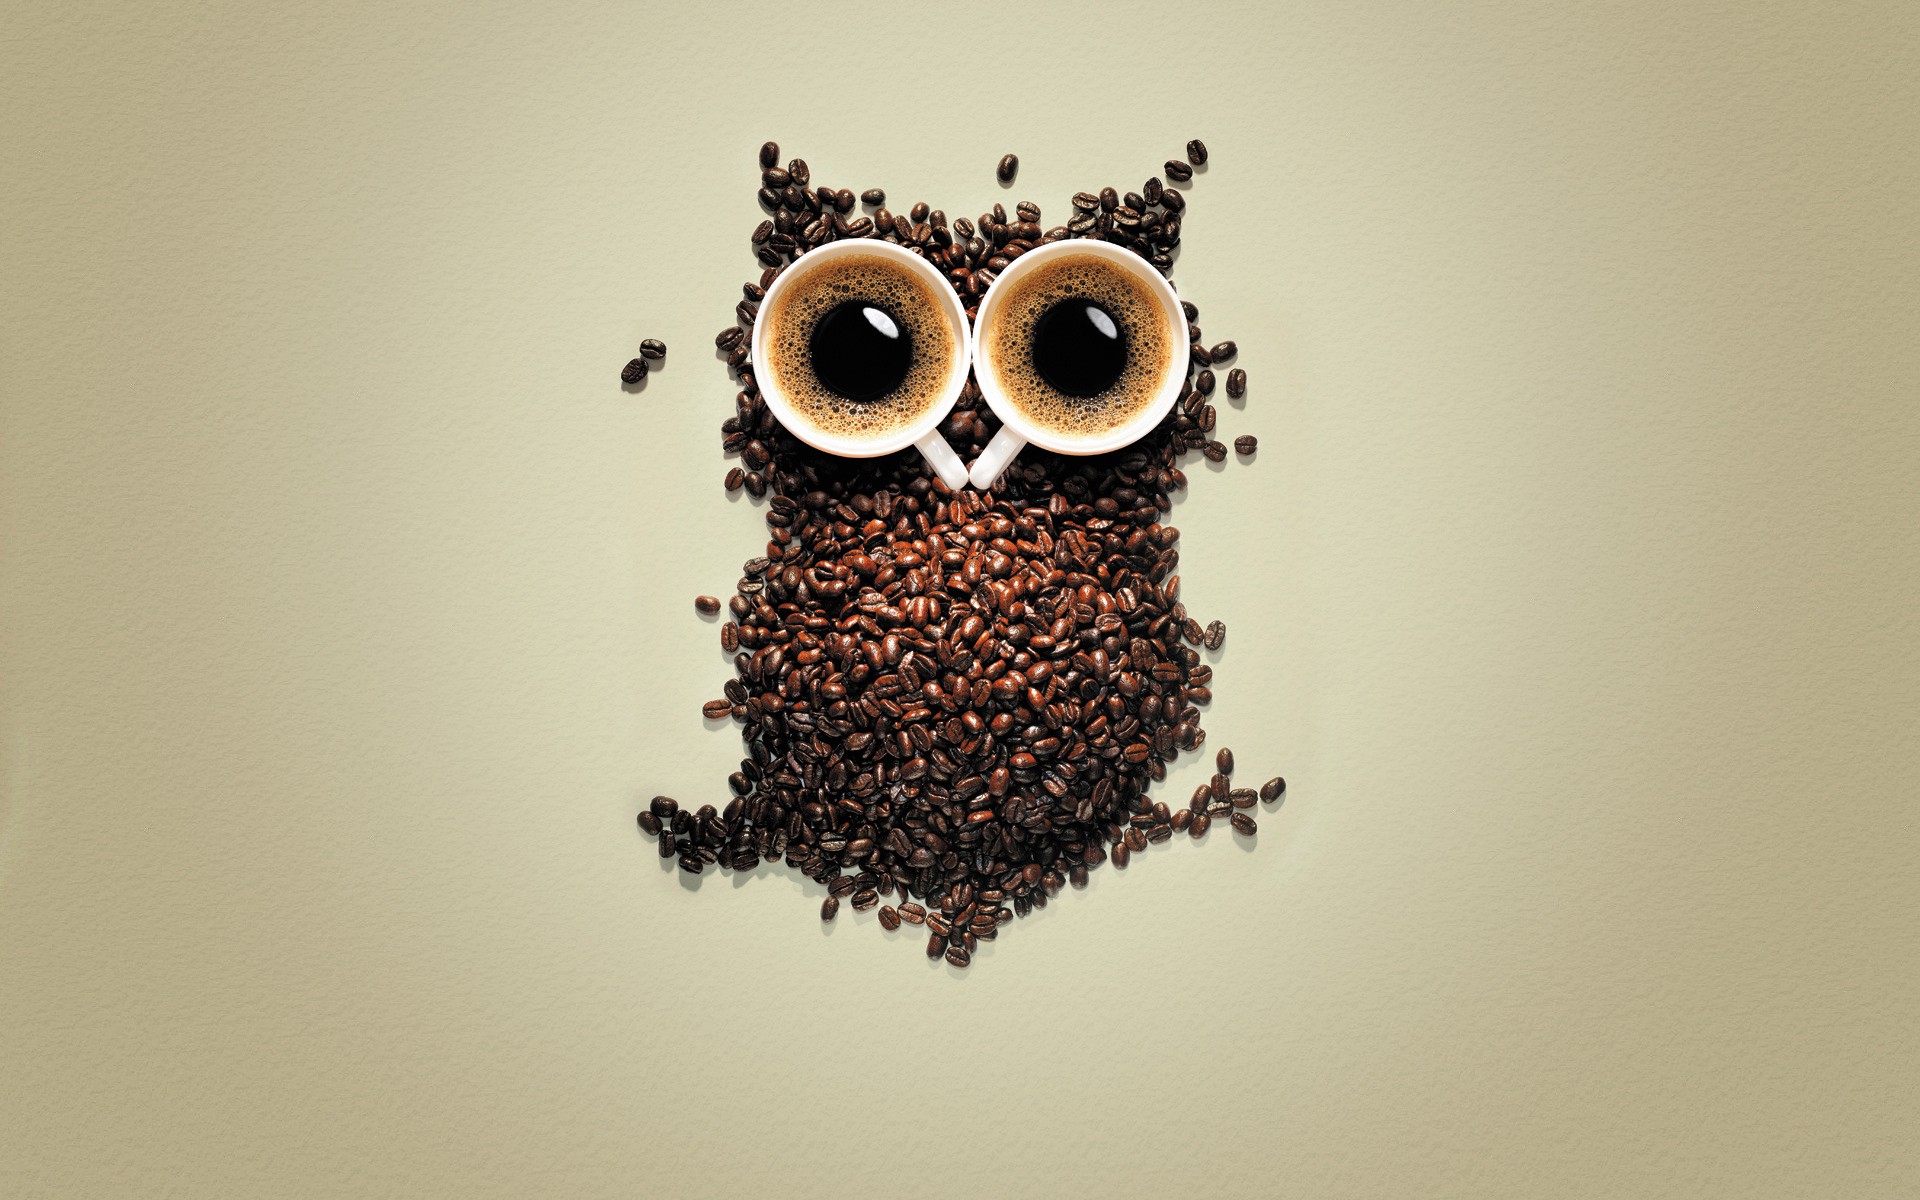 Owl Wallpapers Coffee Owl Myspace Backgrounds Coffee Owl Backgrounds